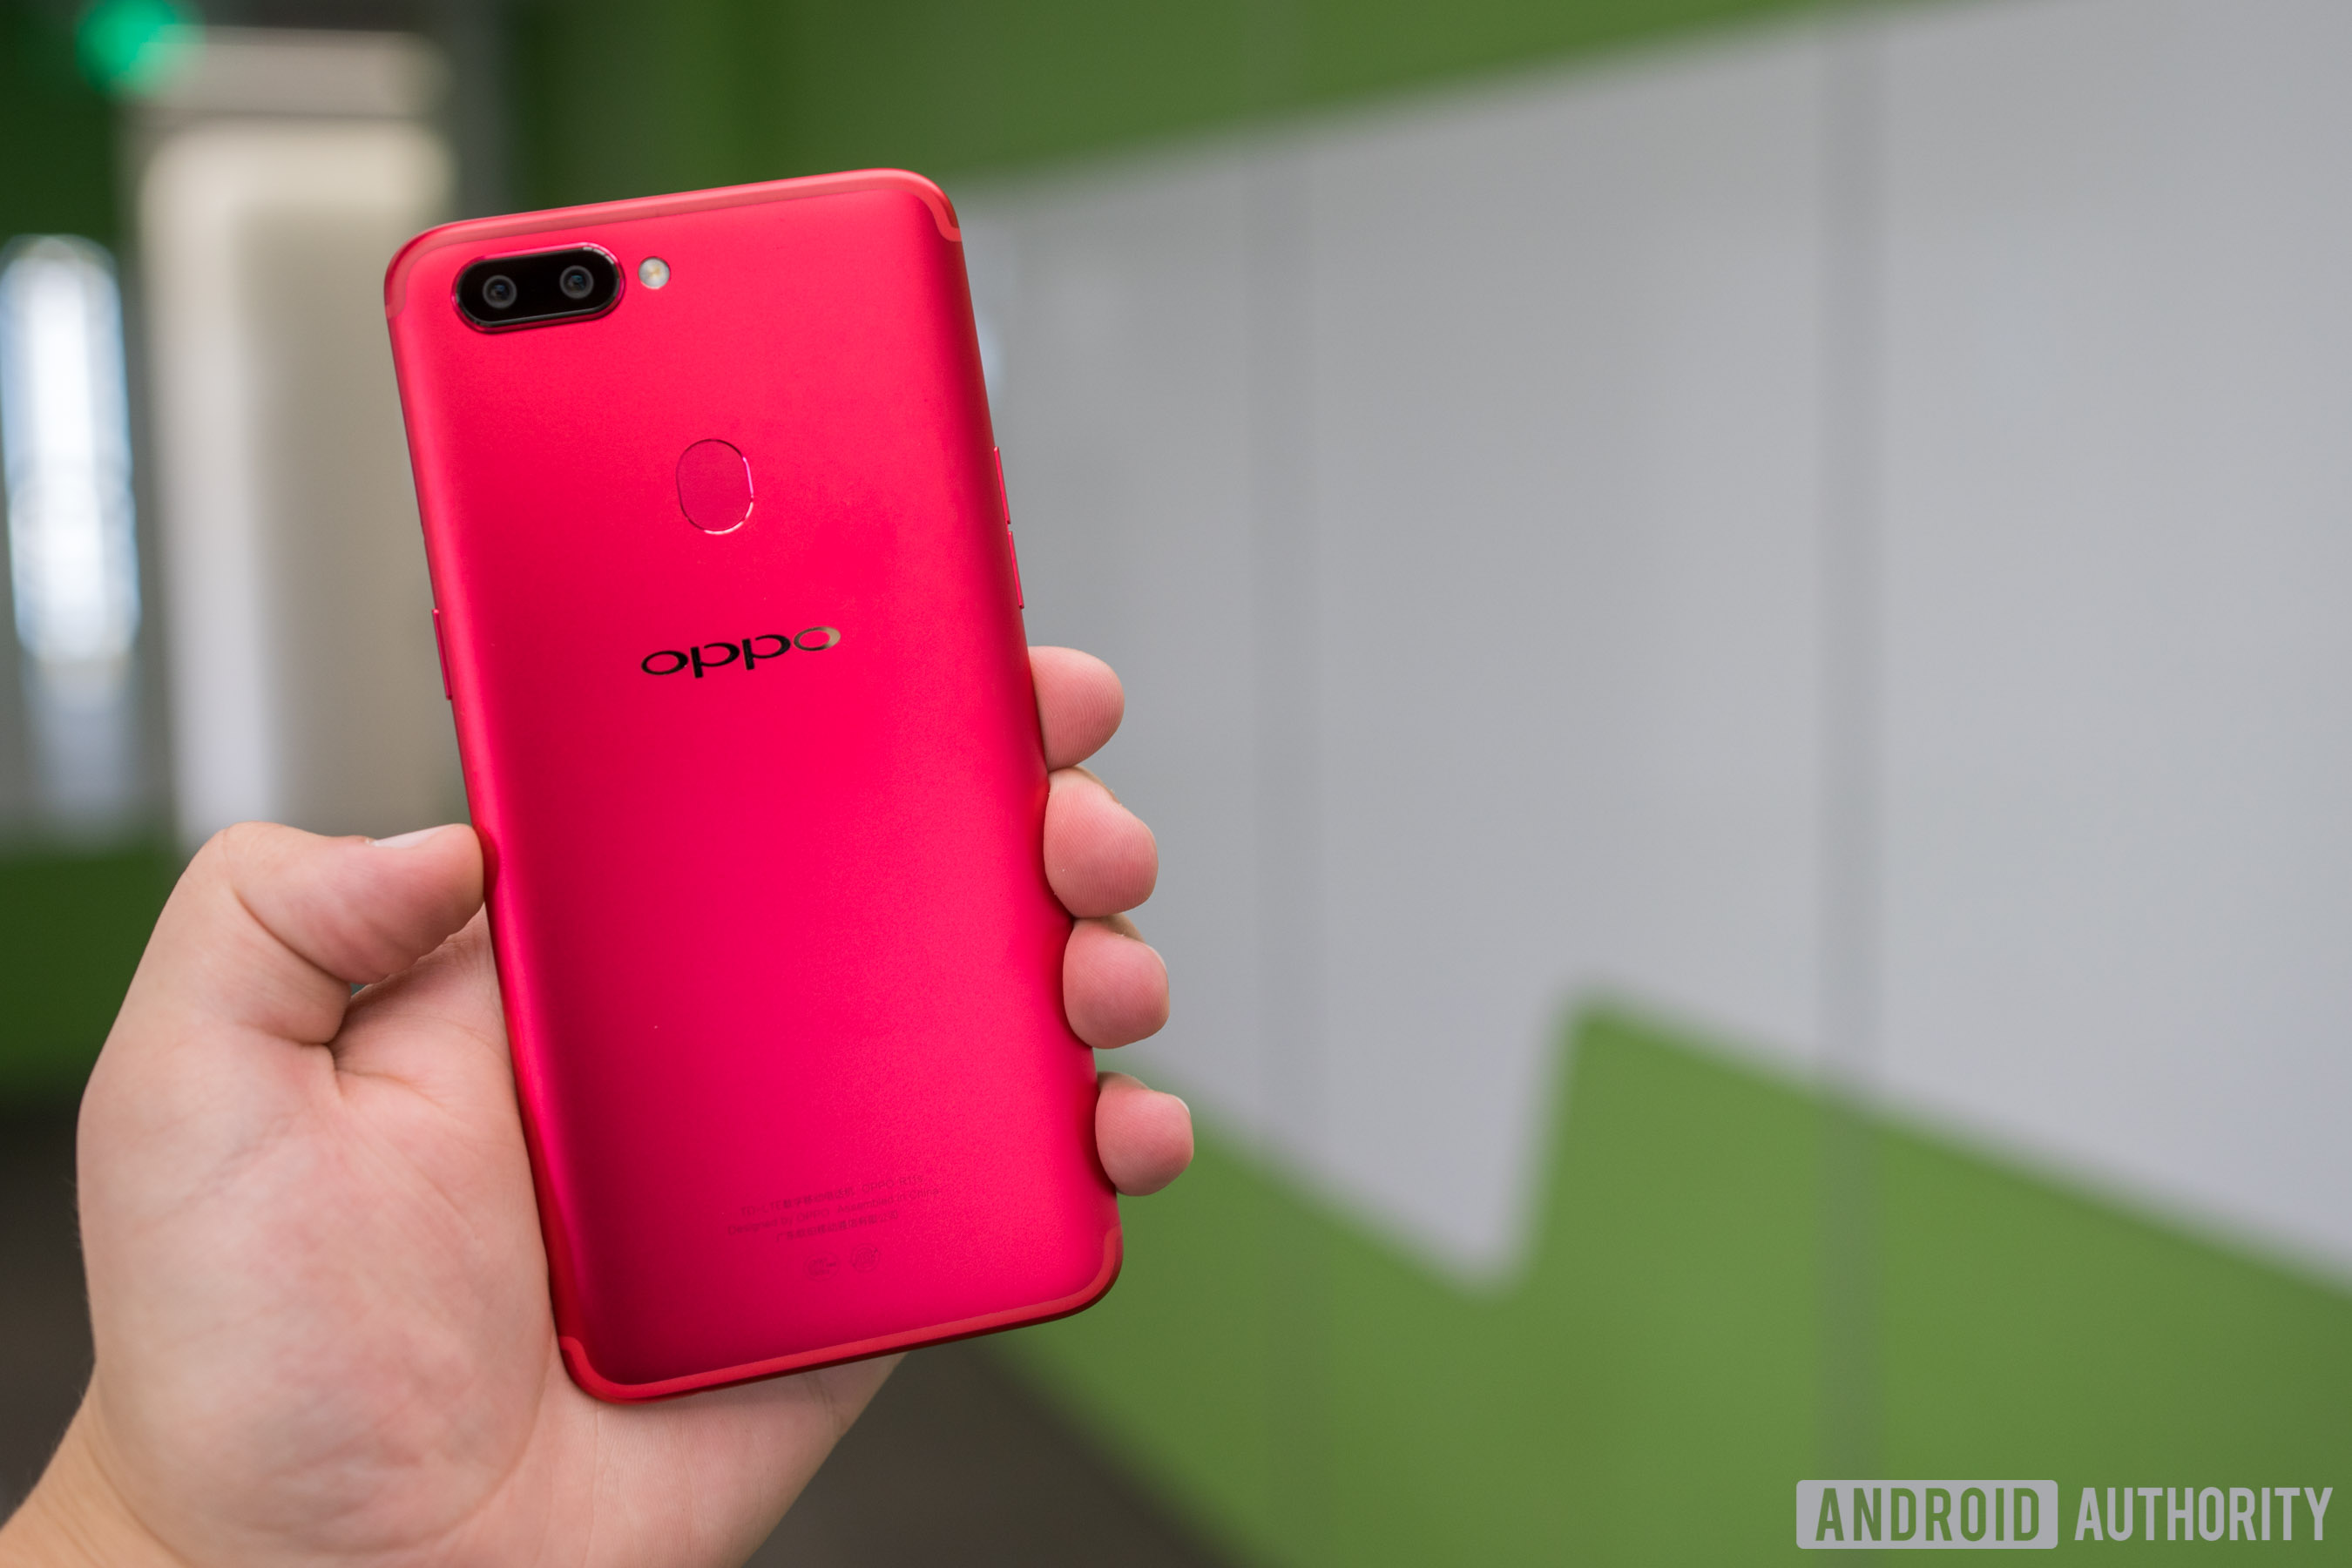 The OPPO R11s smartphone